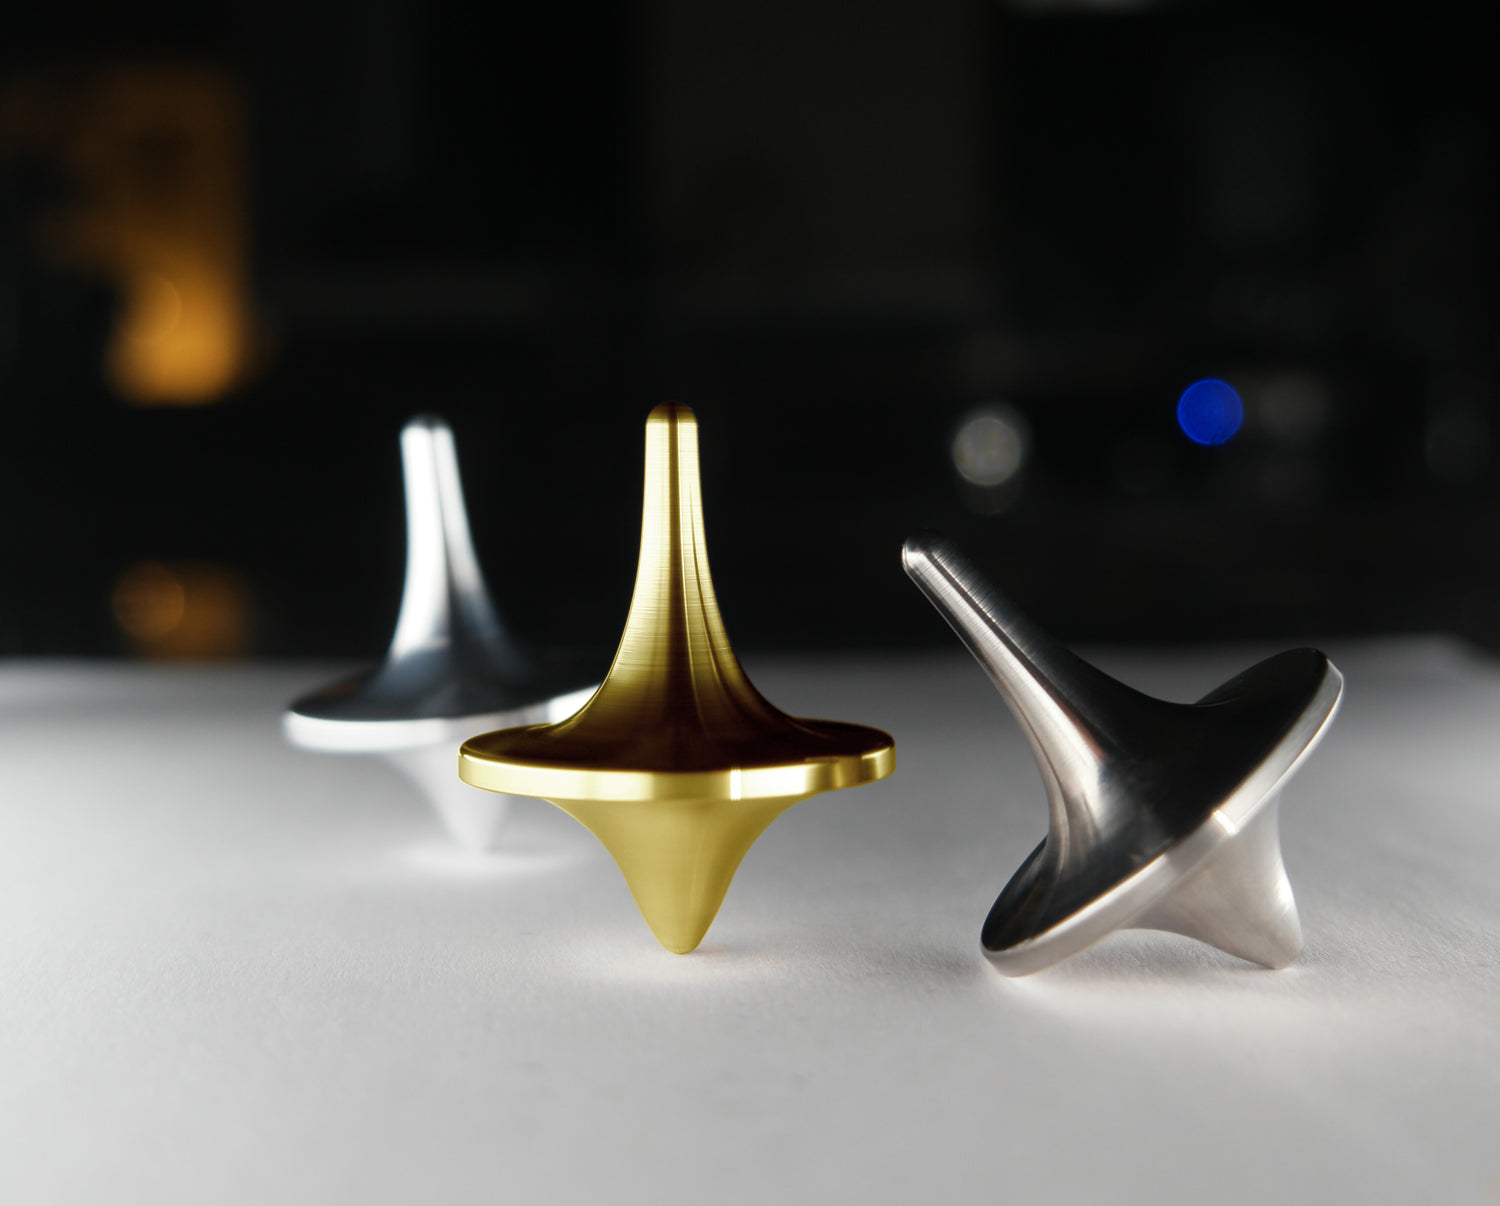 5 Games You Can Play with Your Spinning Tops - Art of Play